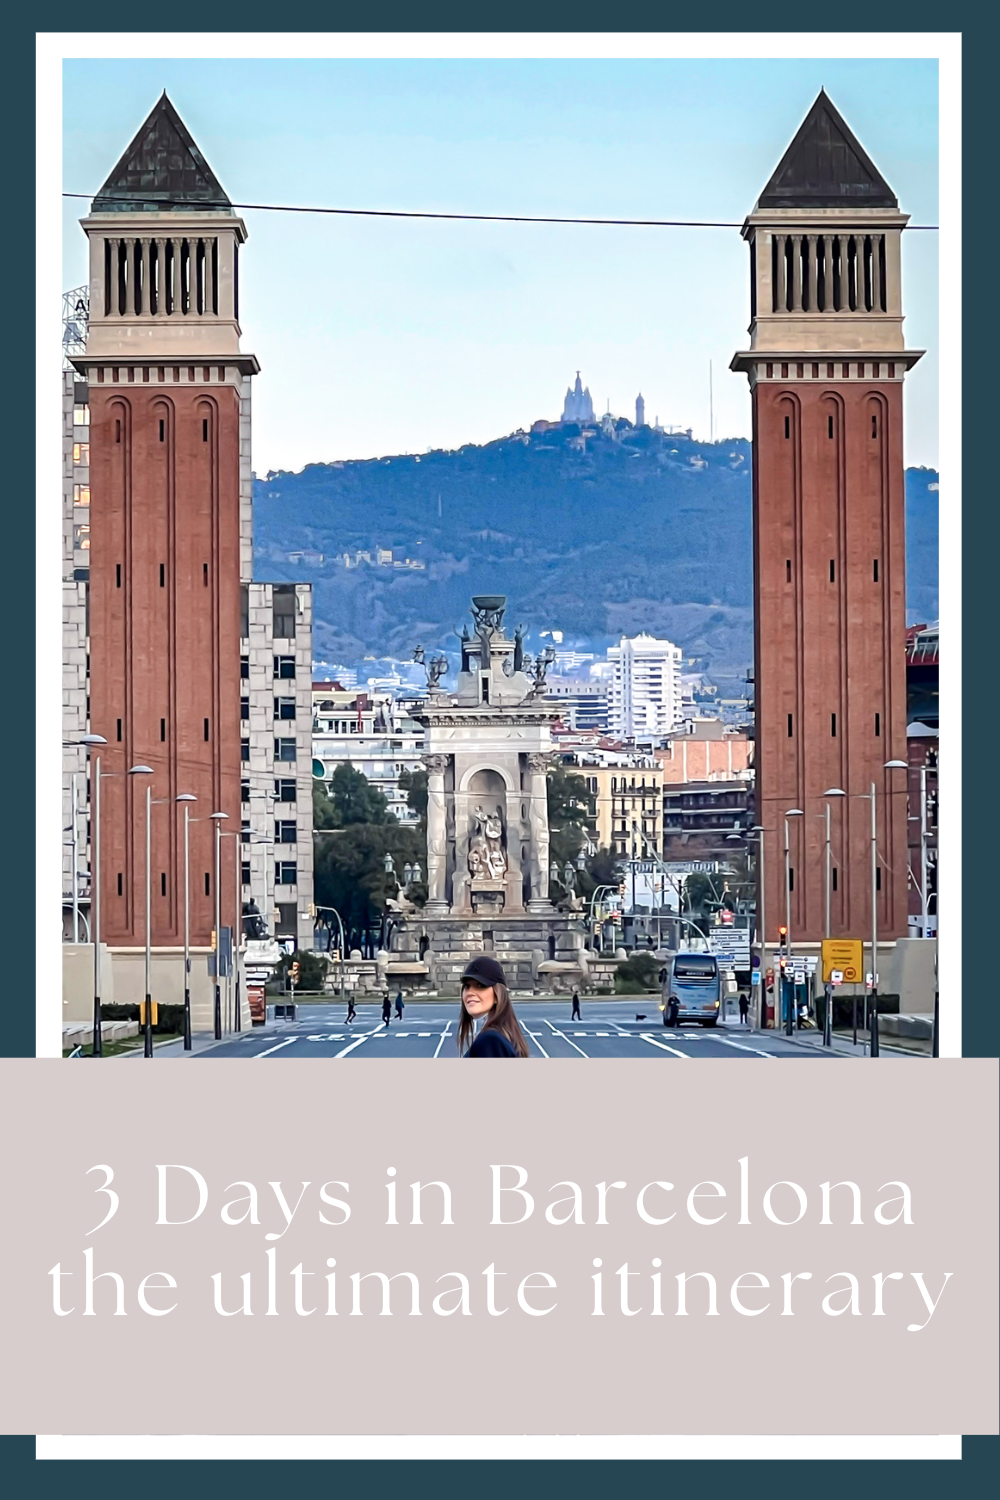 3 Days in Barcelona by My Next Pin